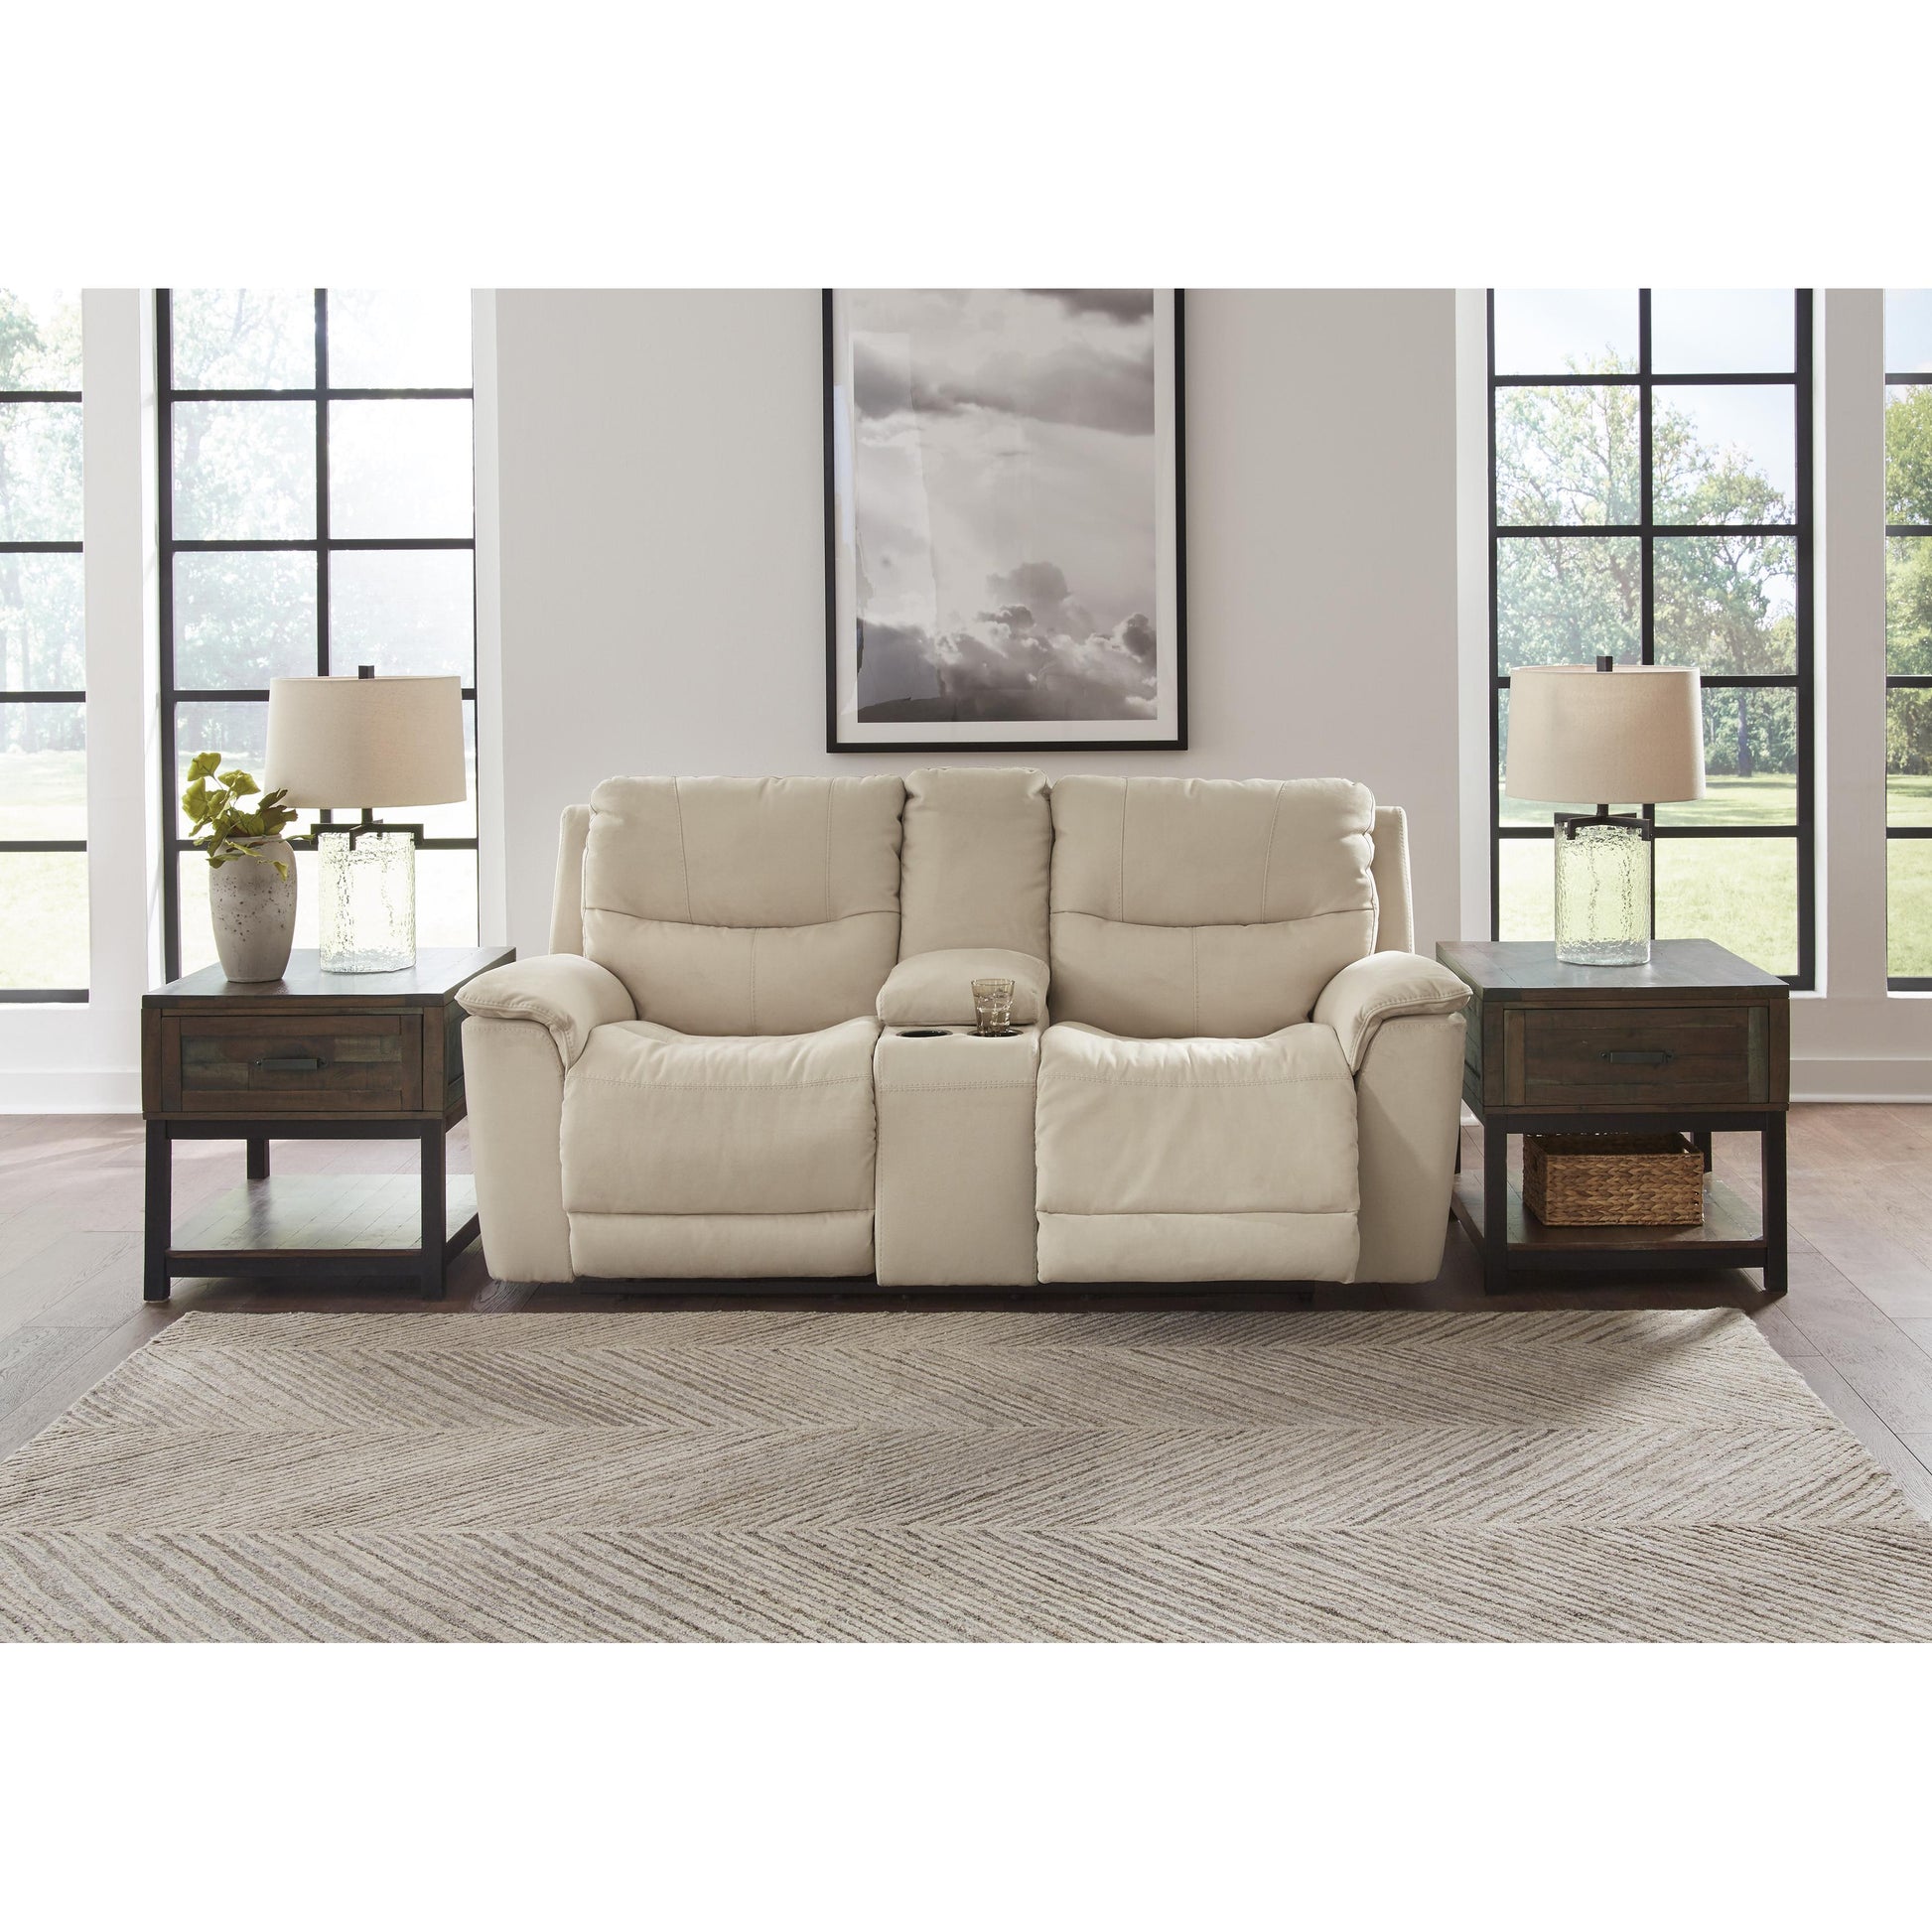 Signature Design by Ashley Next-Gen Gaucho Power Reclining Leather Look Loveseat 6080718 IMAGE 5